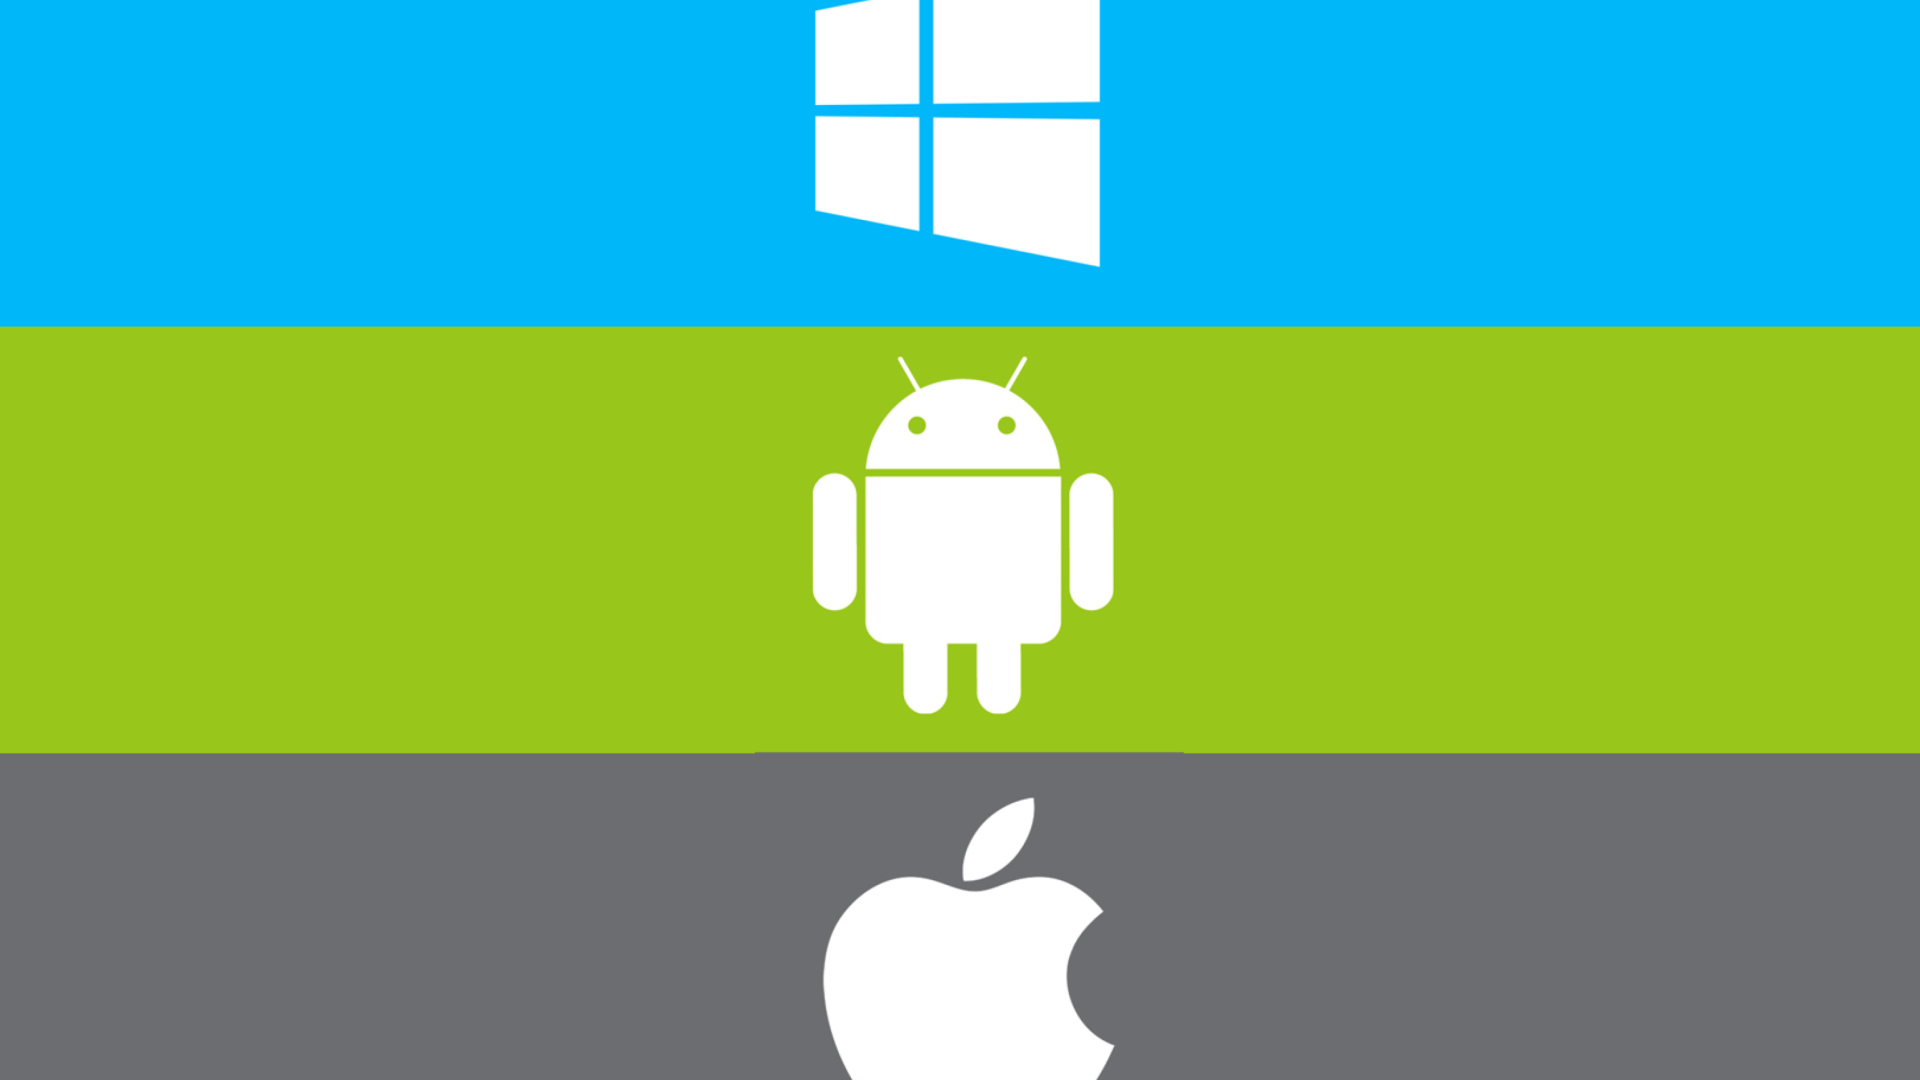 Sfondi Windows, Apple, Android - What's Your Choice? 1920x1080